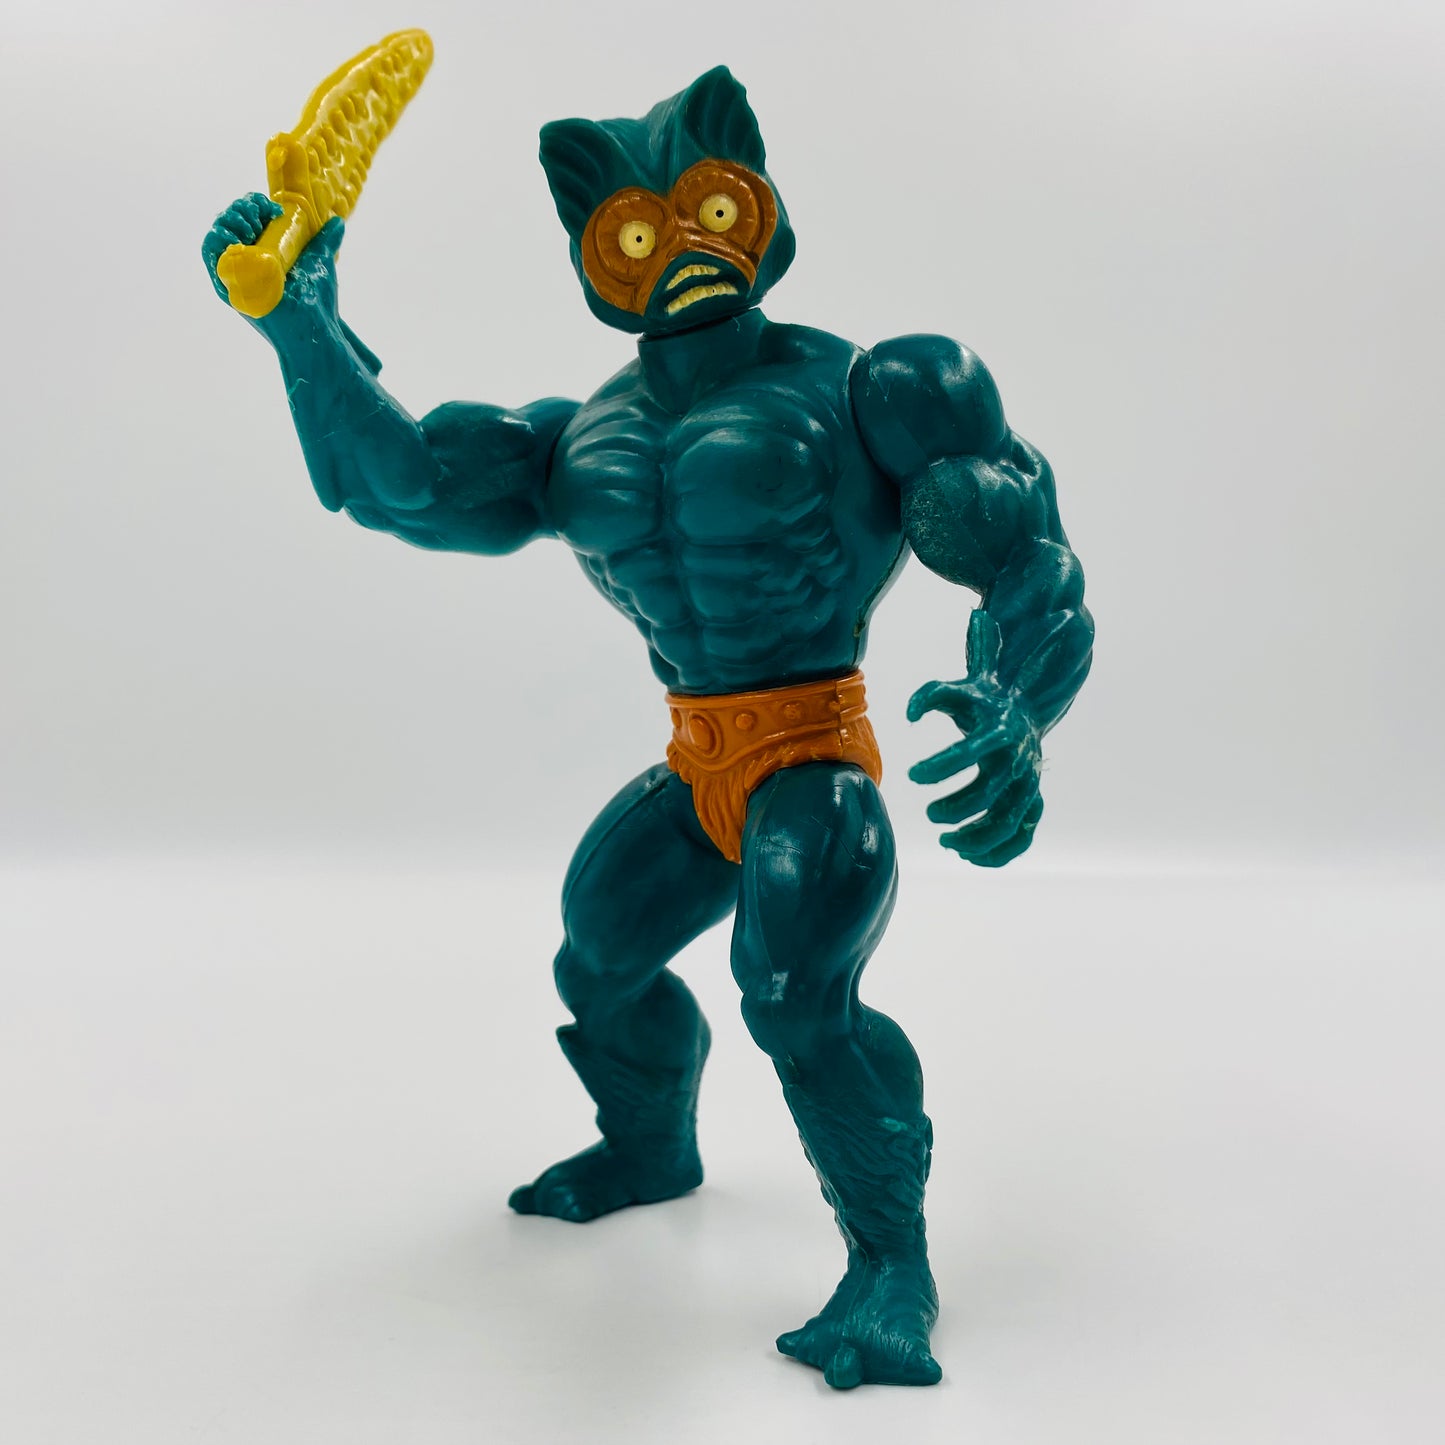 Masters of the Universe Mer-Man loose 5.5" action figure (1982) Mattel